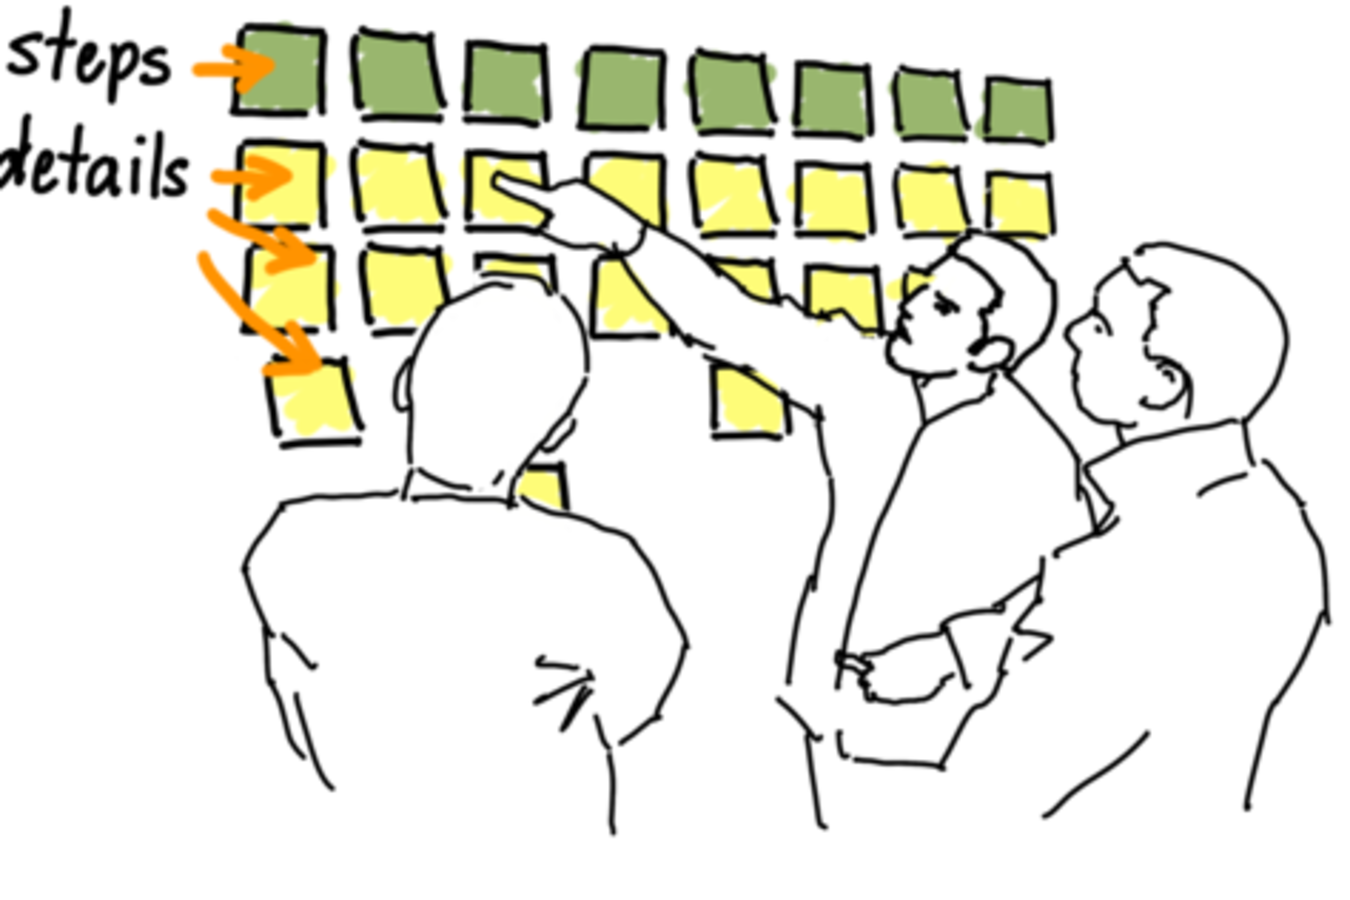 User story mapping from http://jpattonassociates.com/user-story-mapping/